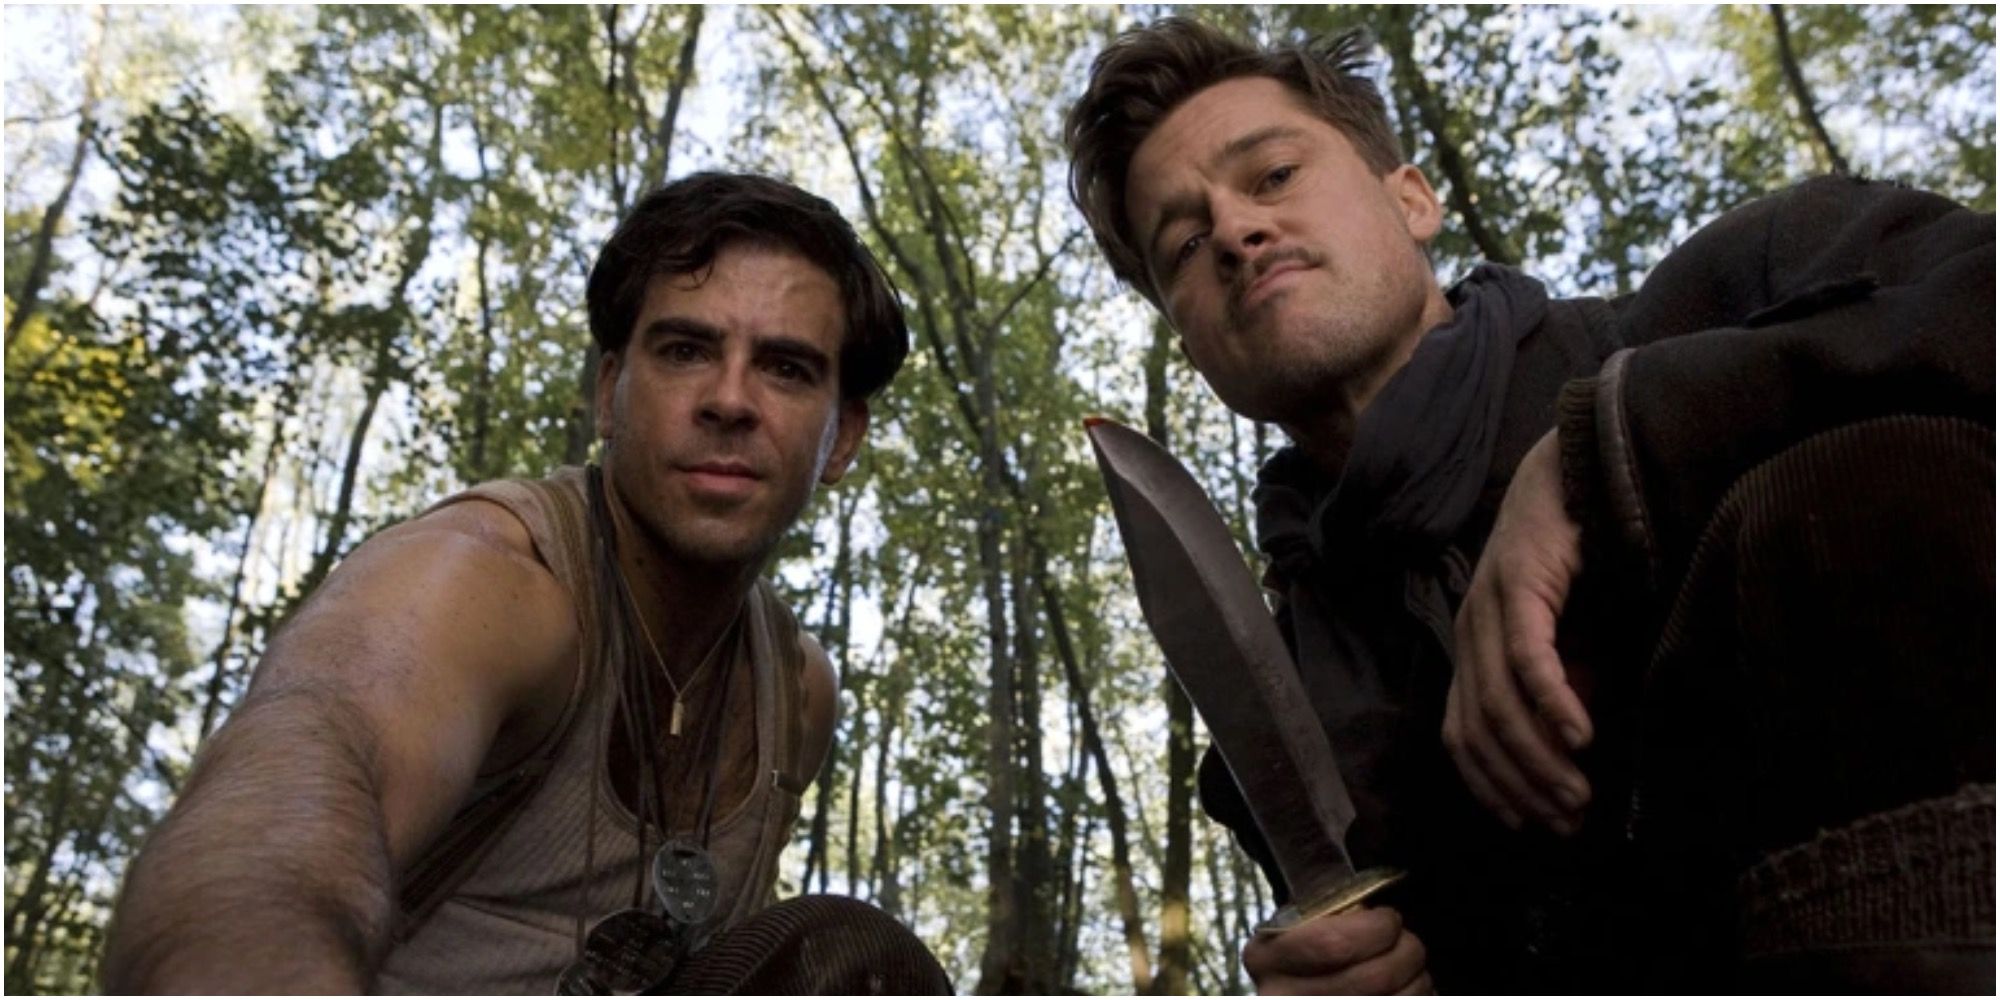 Zachary Quinto (left) and Brad Pitt (right) in Inglorious Basterds